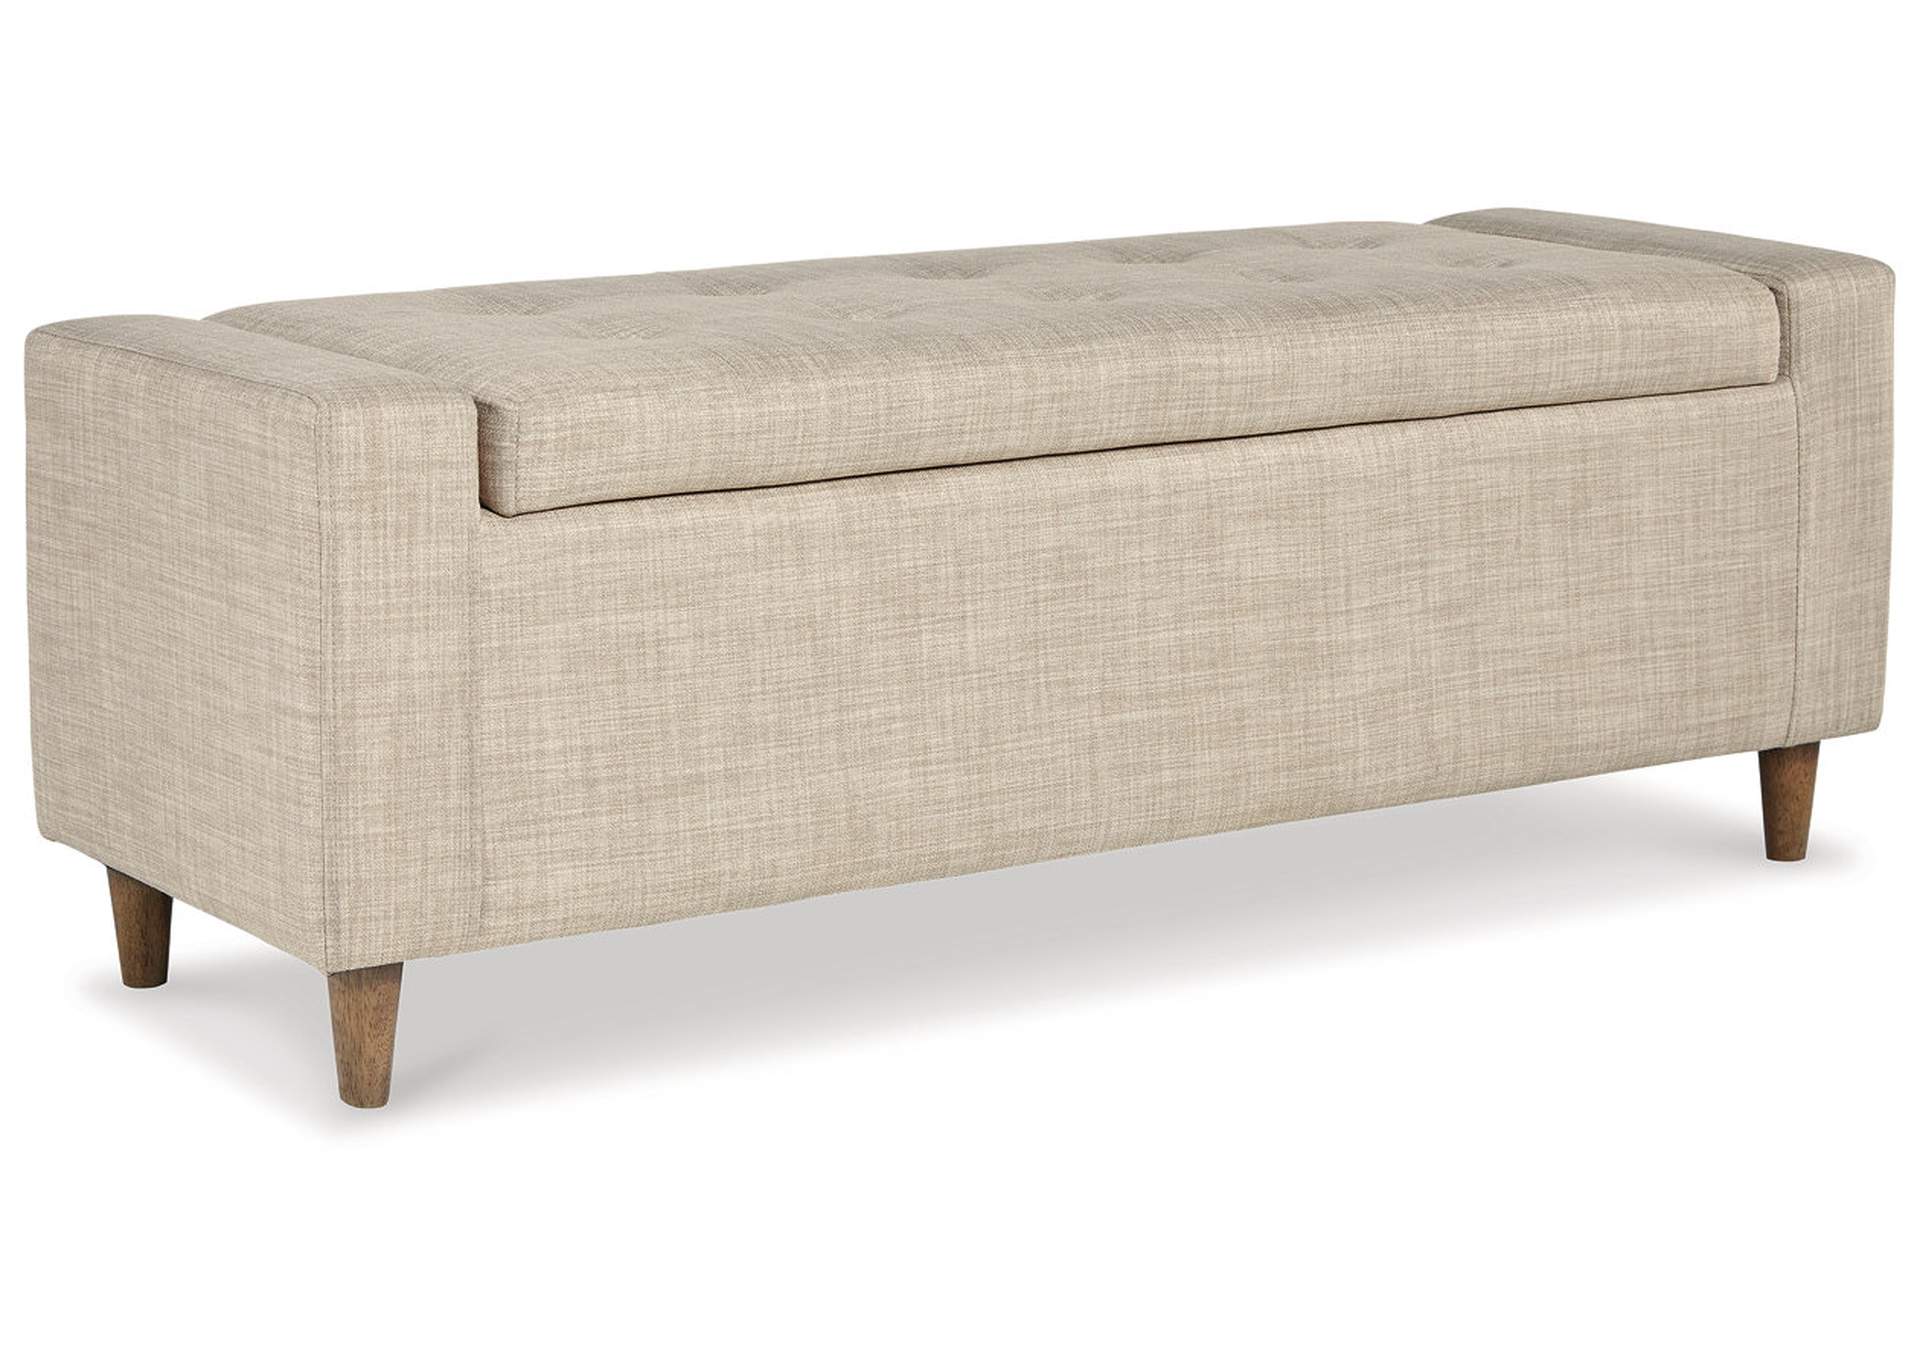 Winler Upholstered Accent Bench,Signature Design By Ashley